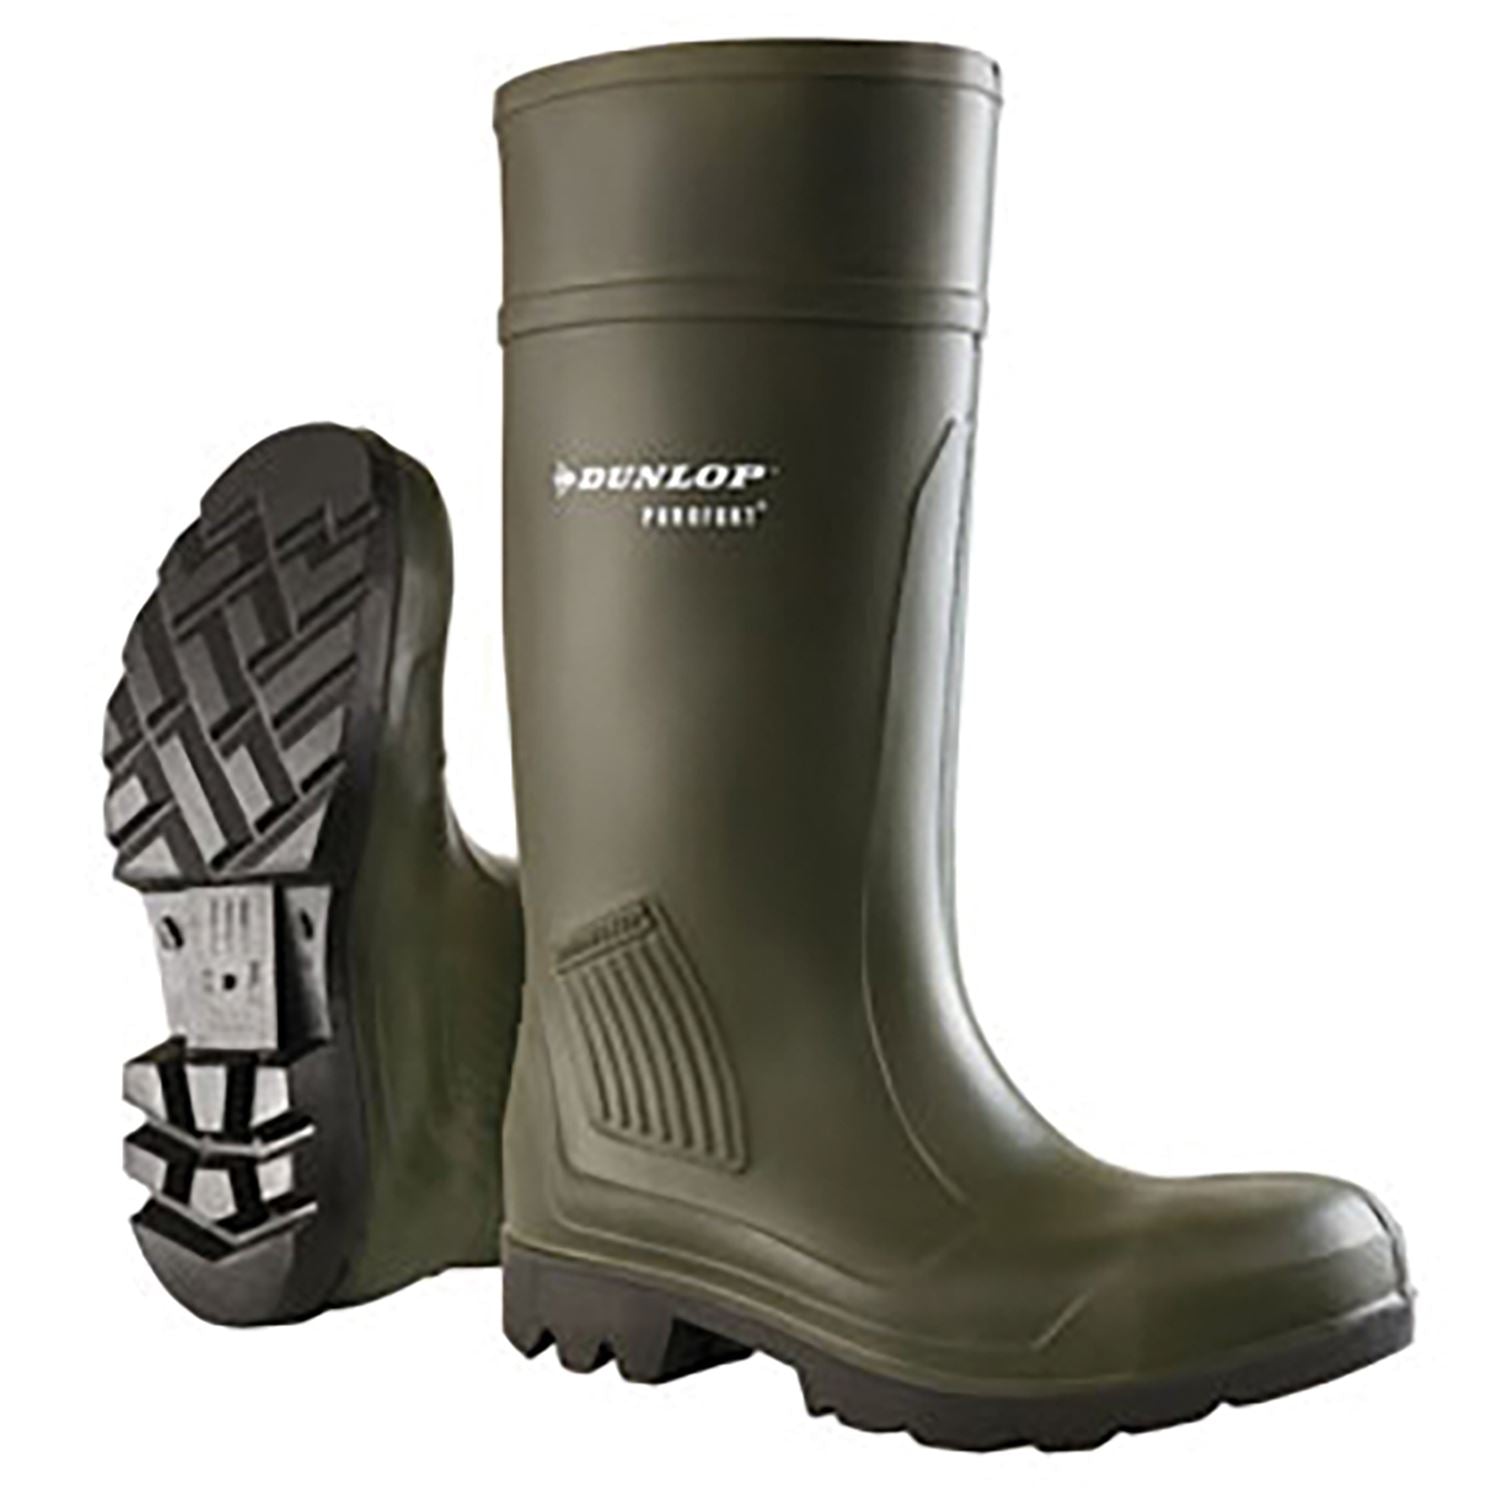 Dunlop Purofort Professional Full Safety Boots - Just Horse Riders